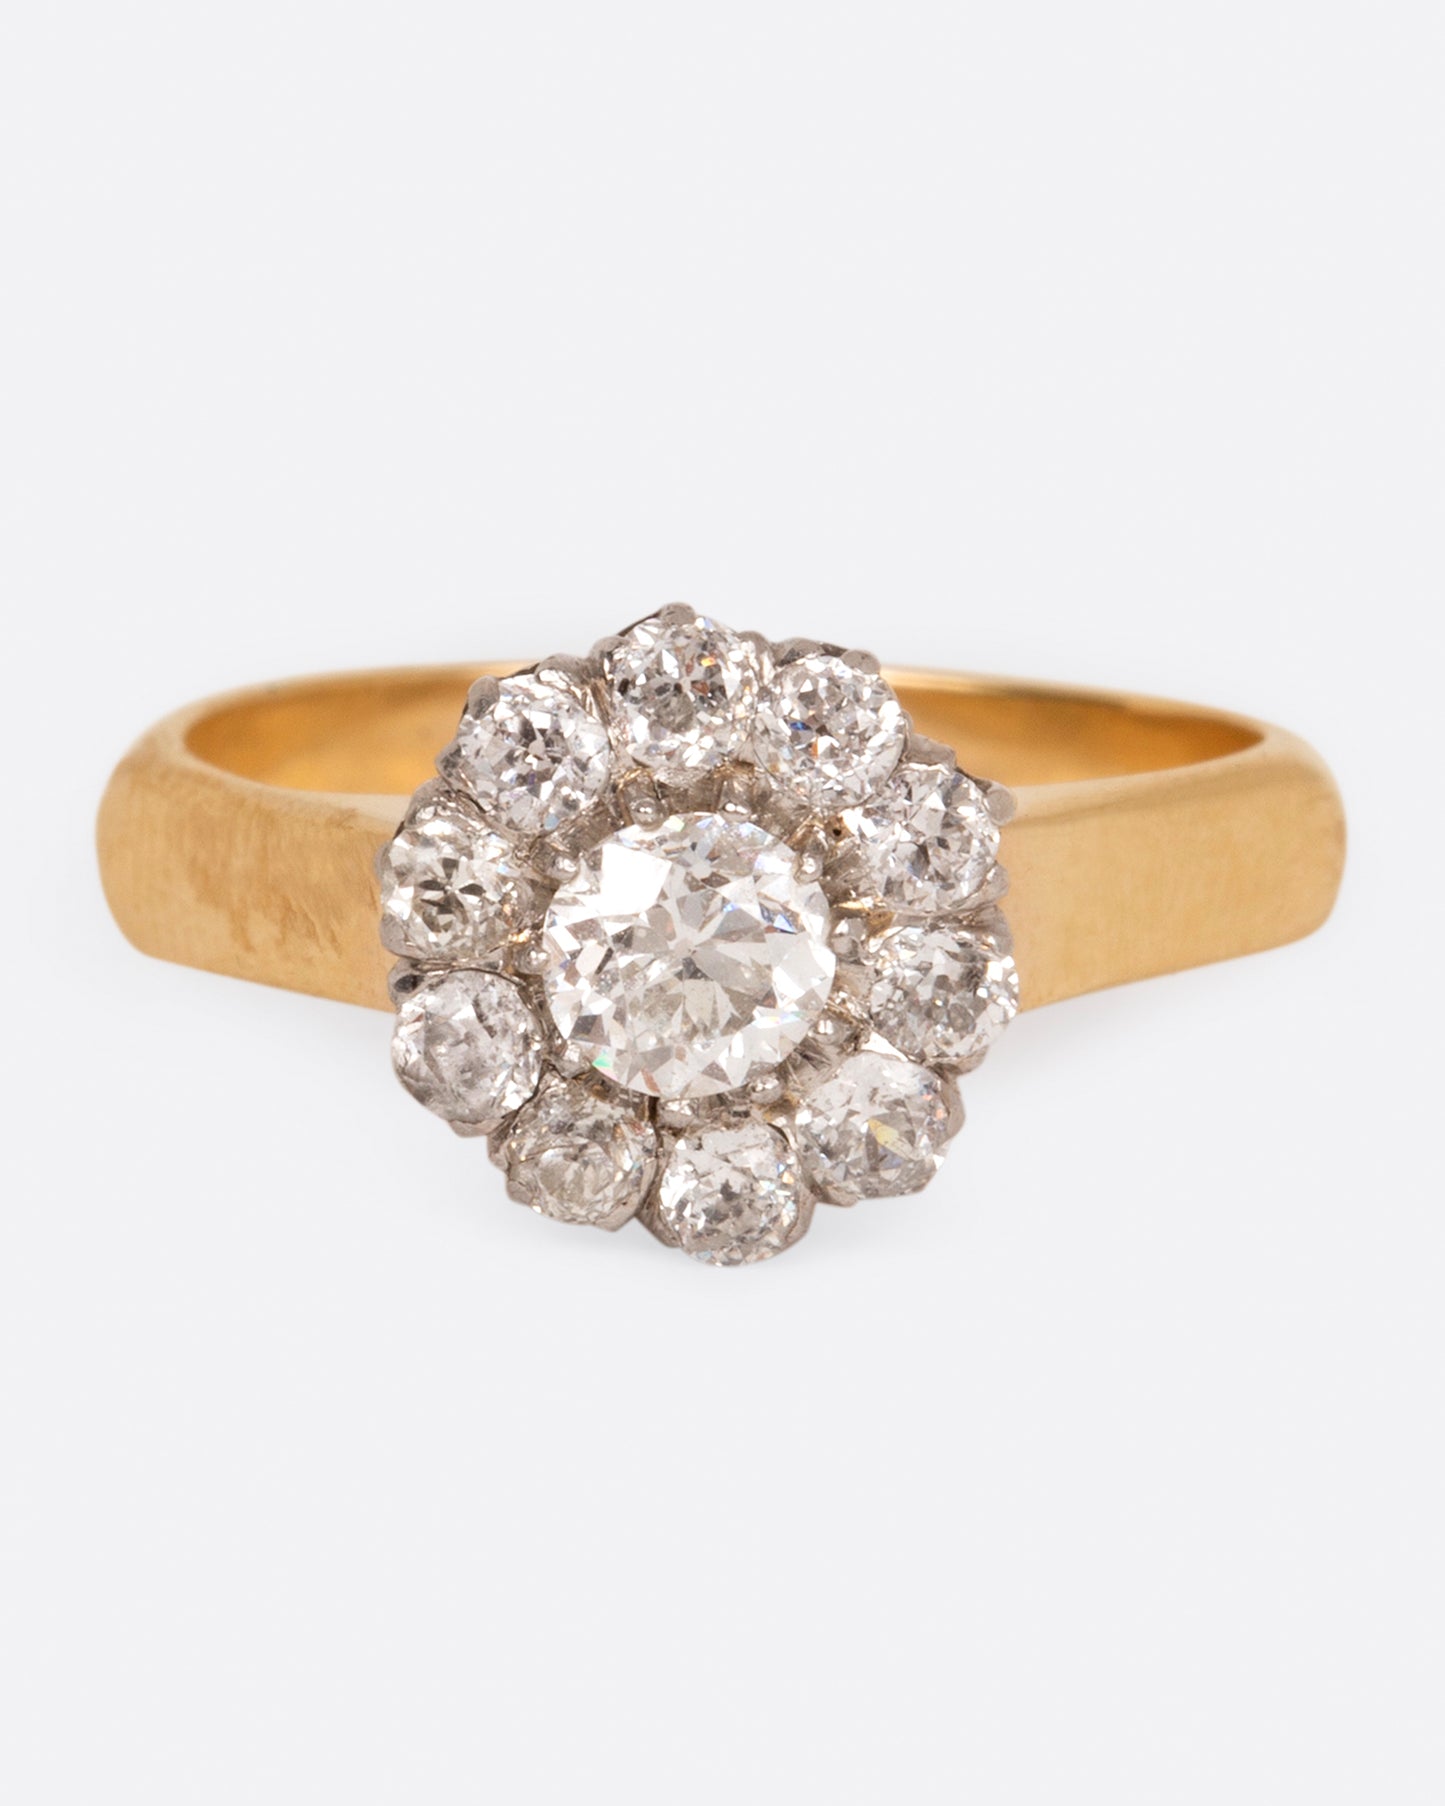 A wide flat yellow gold ring with a flower-shaped cluster of diamonds, shown from the front.